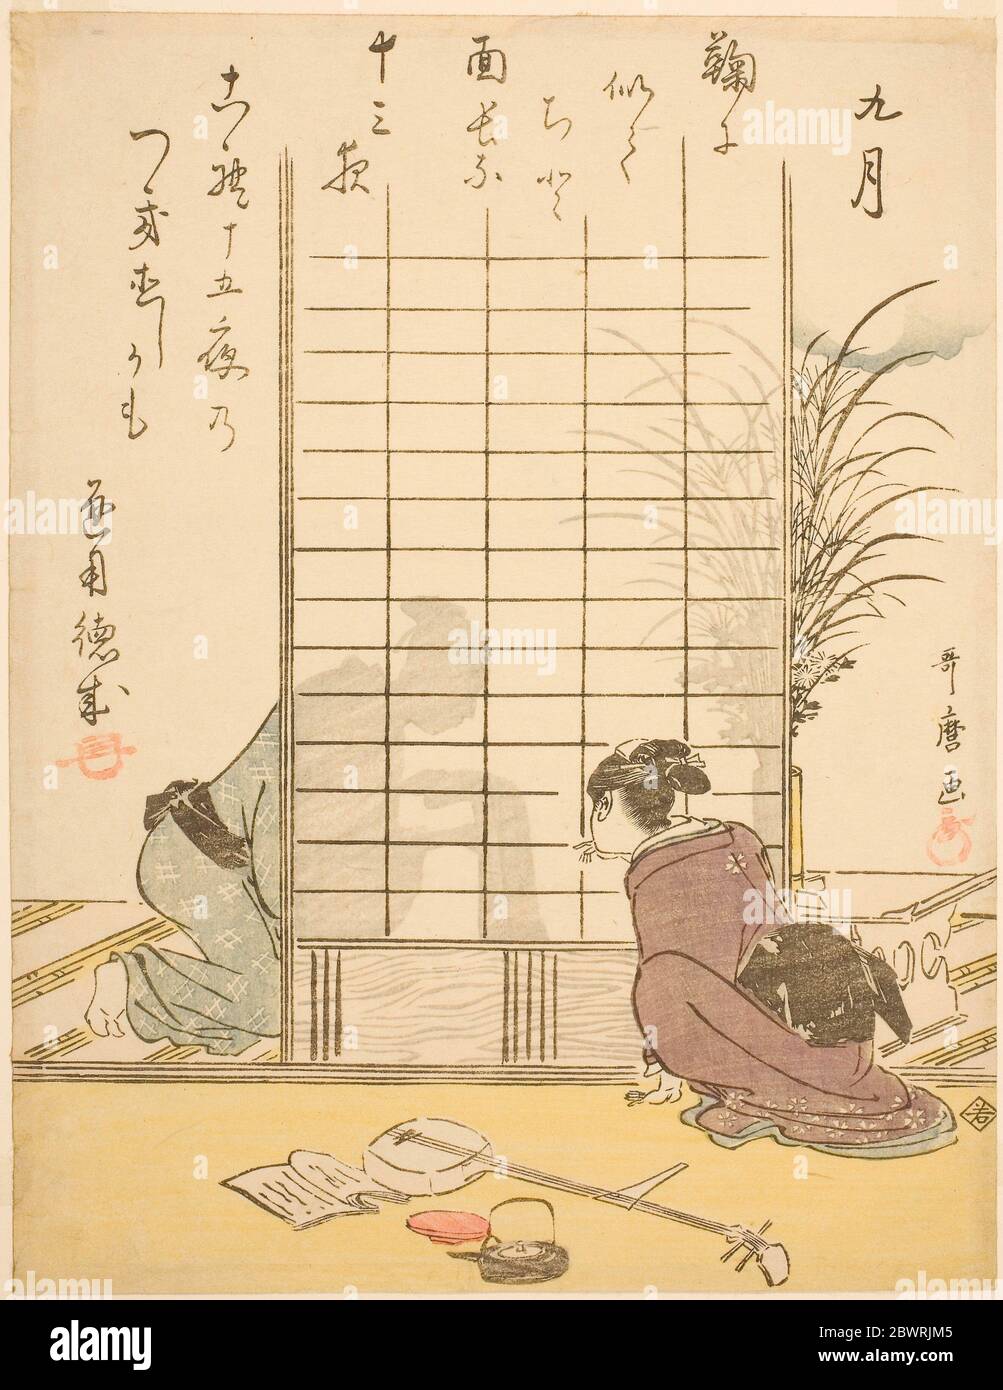 Author: Kitagawa Utamaro. The Ninth Month (Kugatsu), from an untitled series of genre scenes in the twelve months, with kyoka poems - c. 1792/93 - Stock Photo